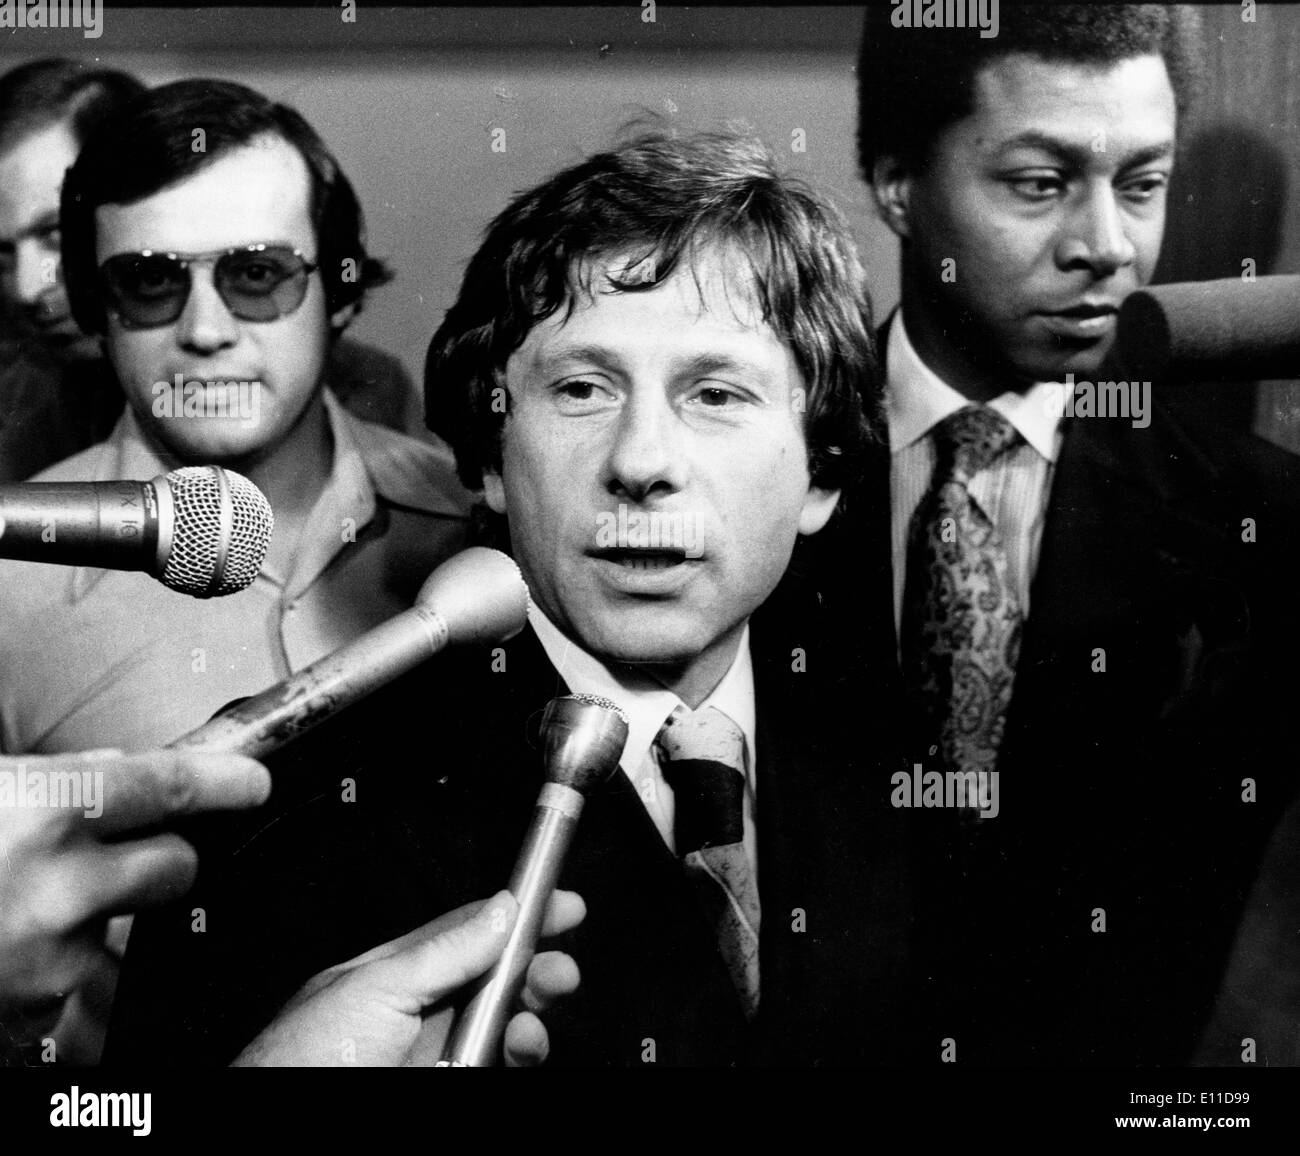 Apr 15, 1977; Paris, France; Film director and actor ROMAN POLANSKI (b. 8/18/1933) was exiled from the United States after trying to flee from incarceration, and was the husband of actress Sharon Tate when she was brutally murdered by the Manson Family.. (Credit Image: KEYSTONE Pictures USA/ZUMAPRESS.com) Stock Photo